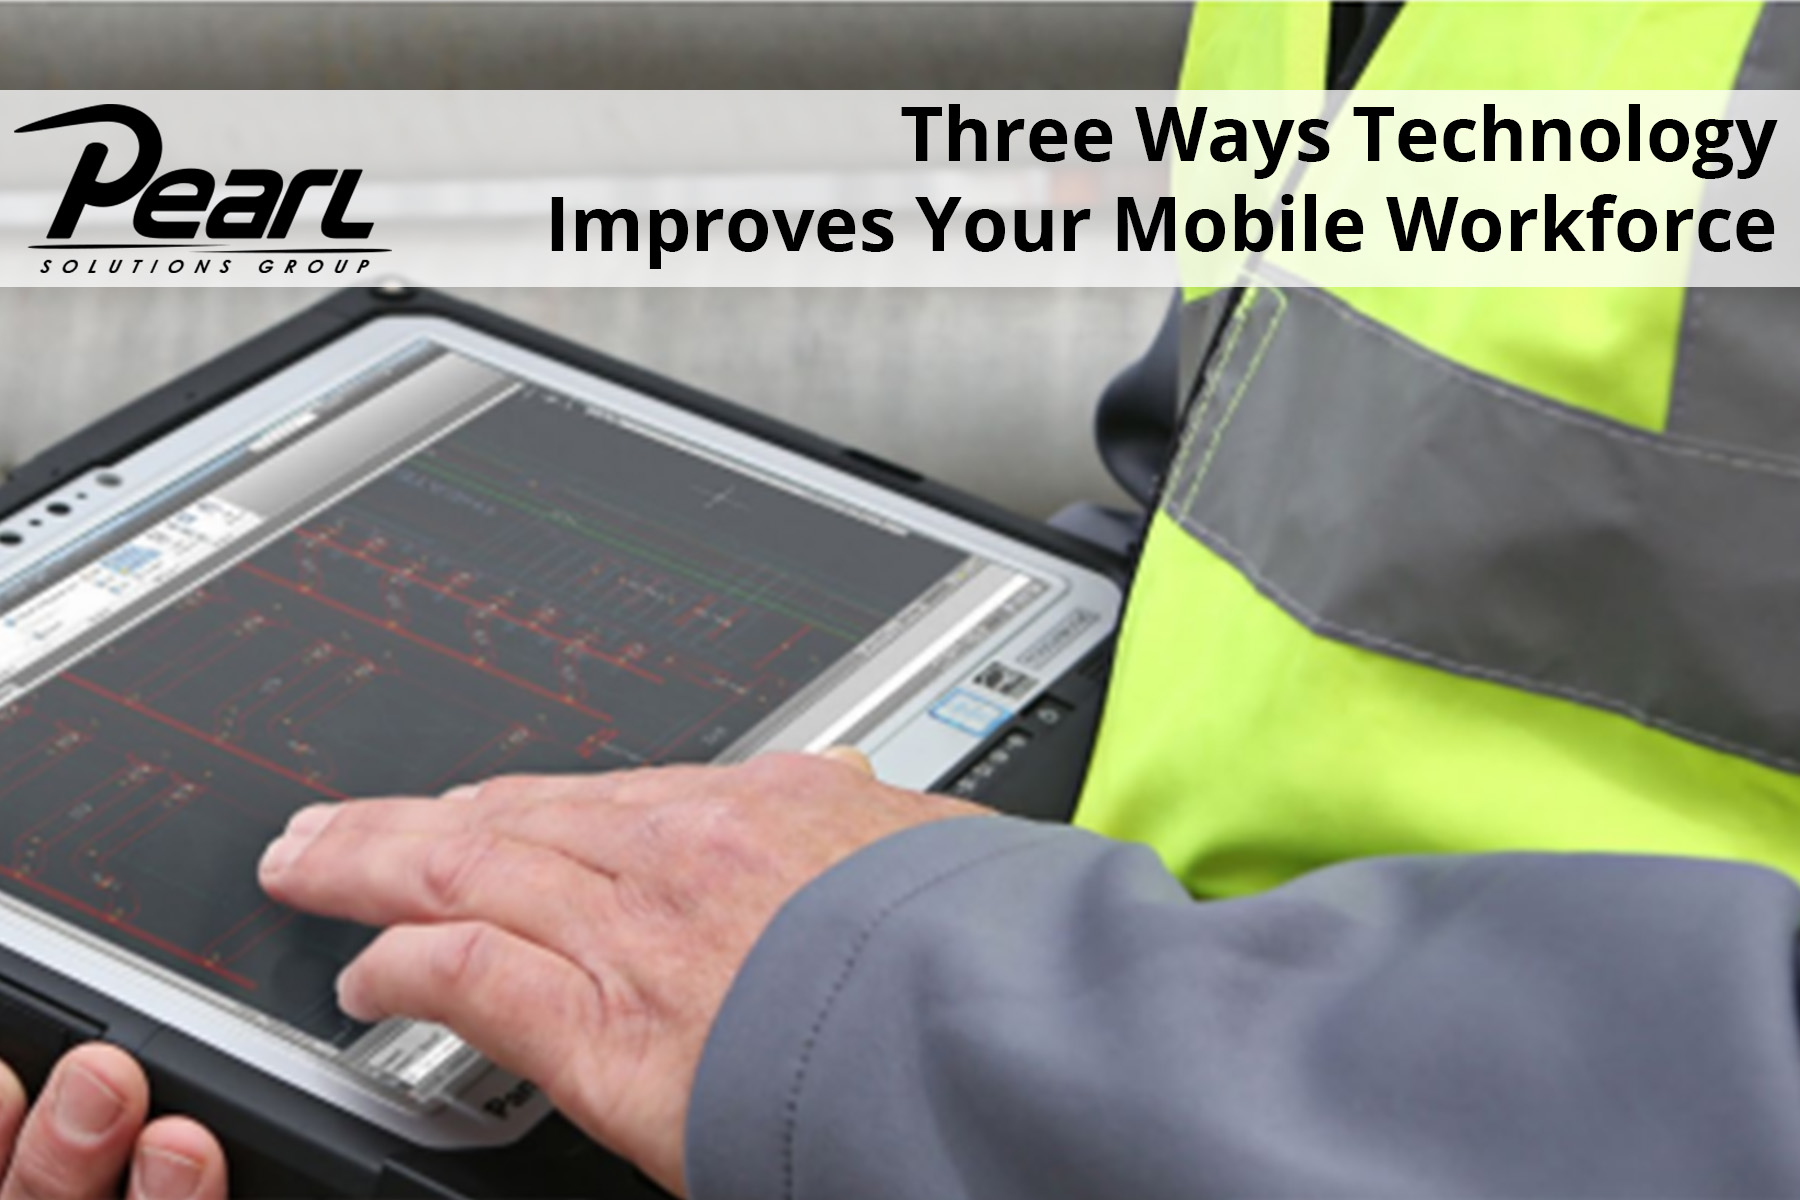 Three Ways Technology Improves Your Mobile Workforce